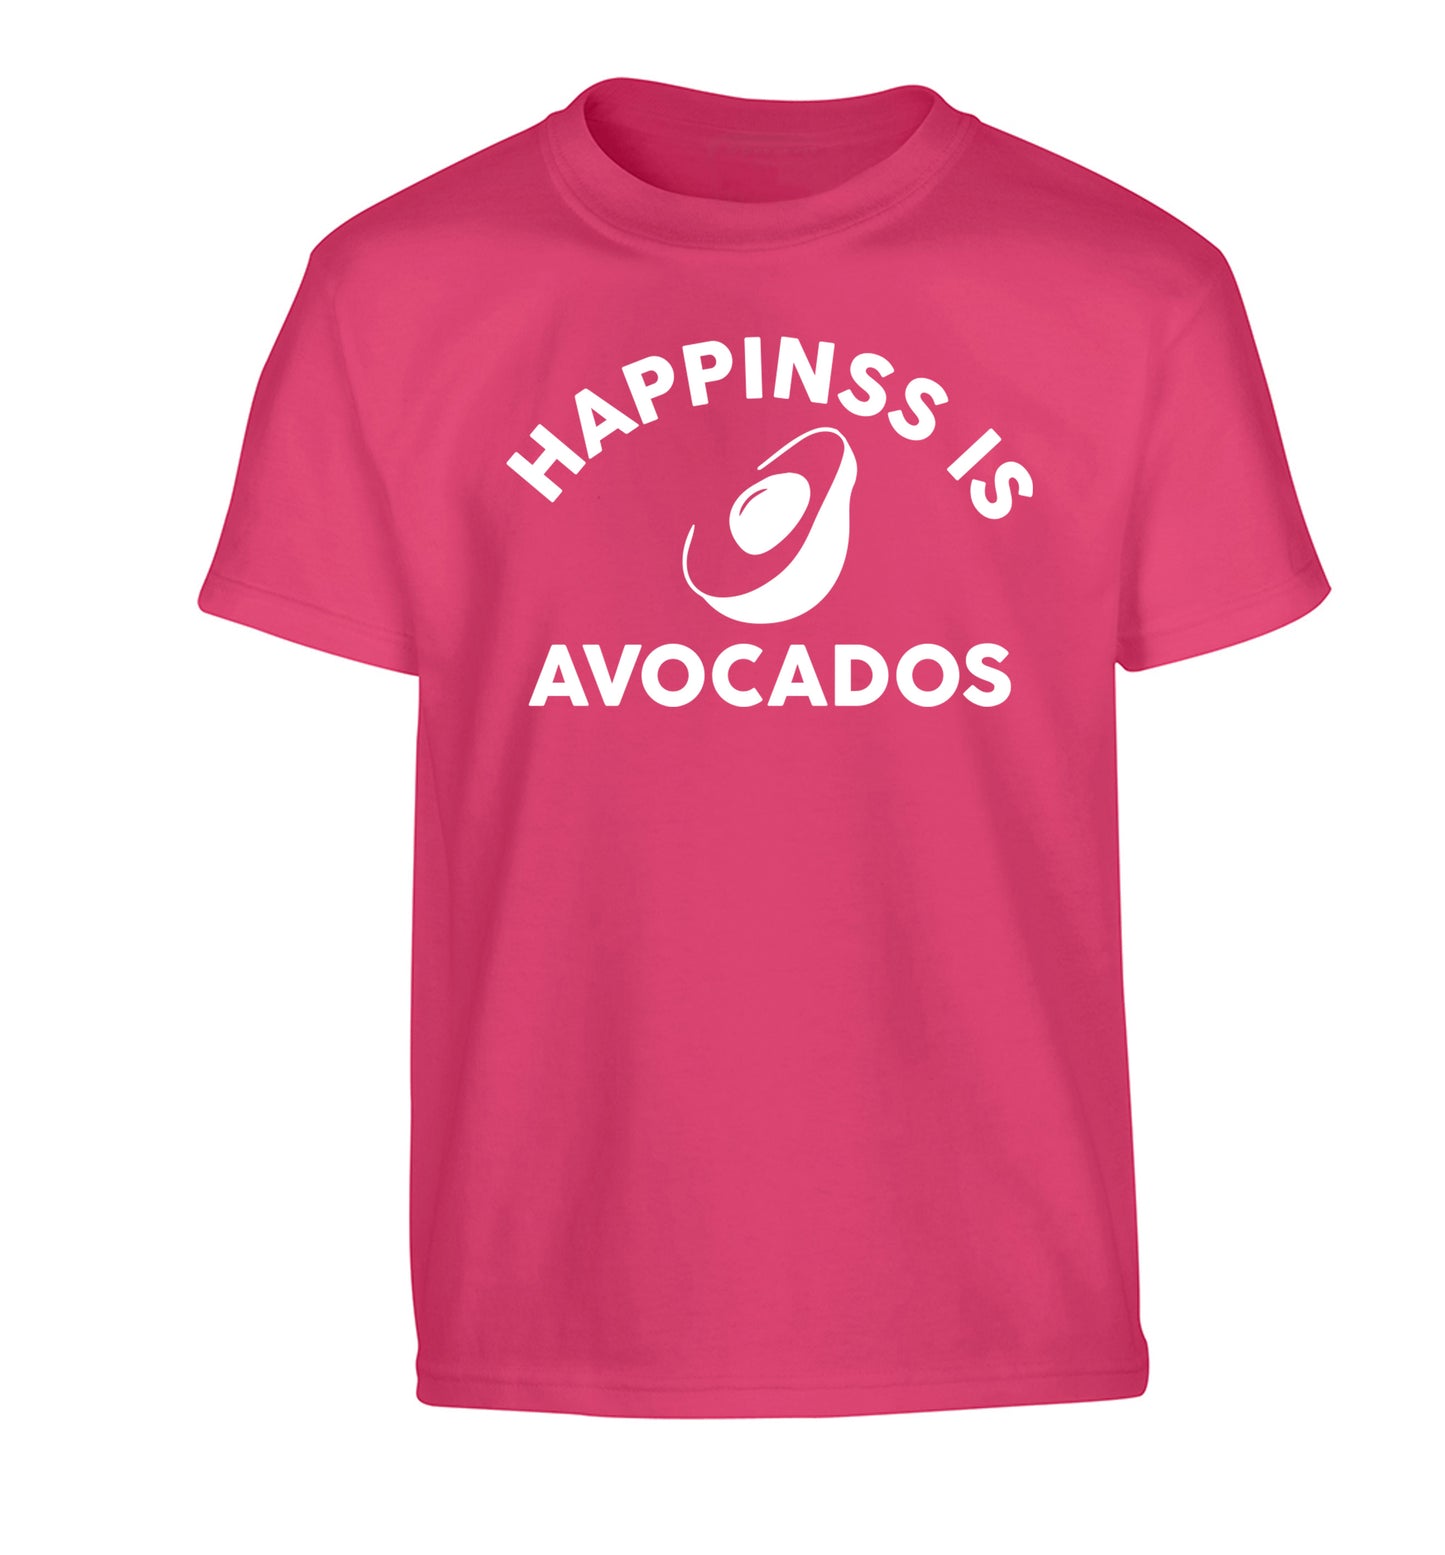 Happiness is avocados Children's pink Tshirt 12-14 Years